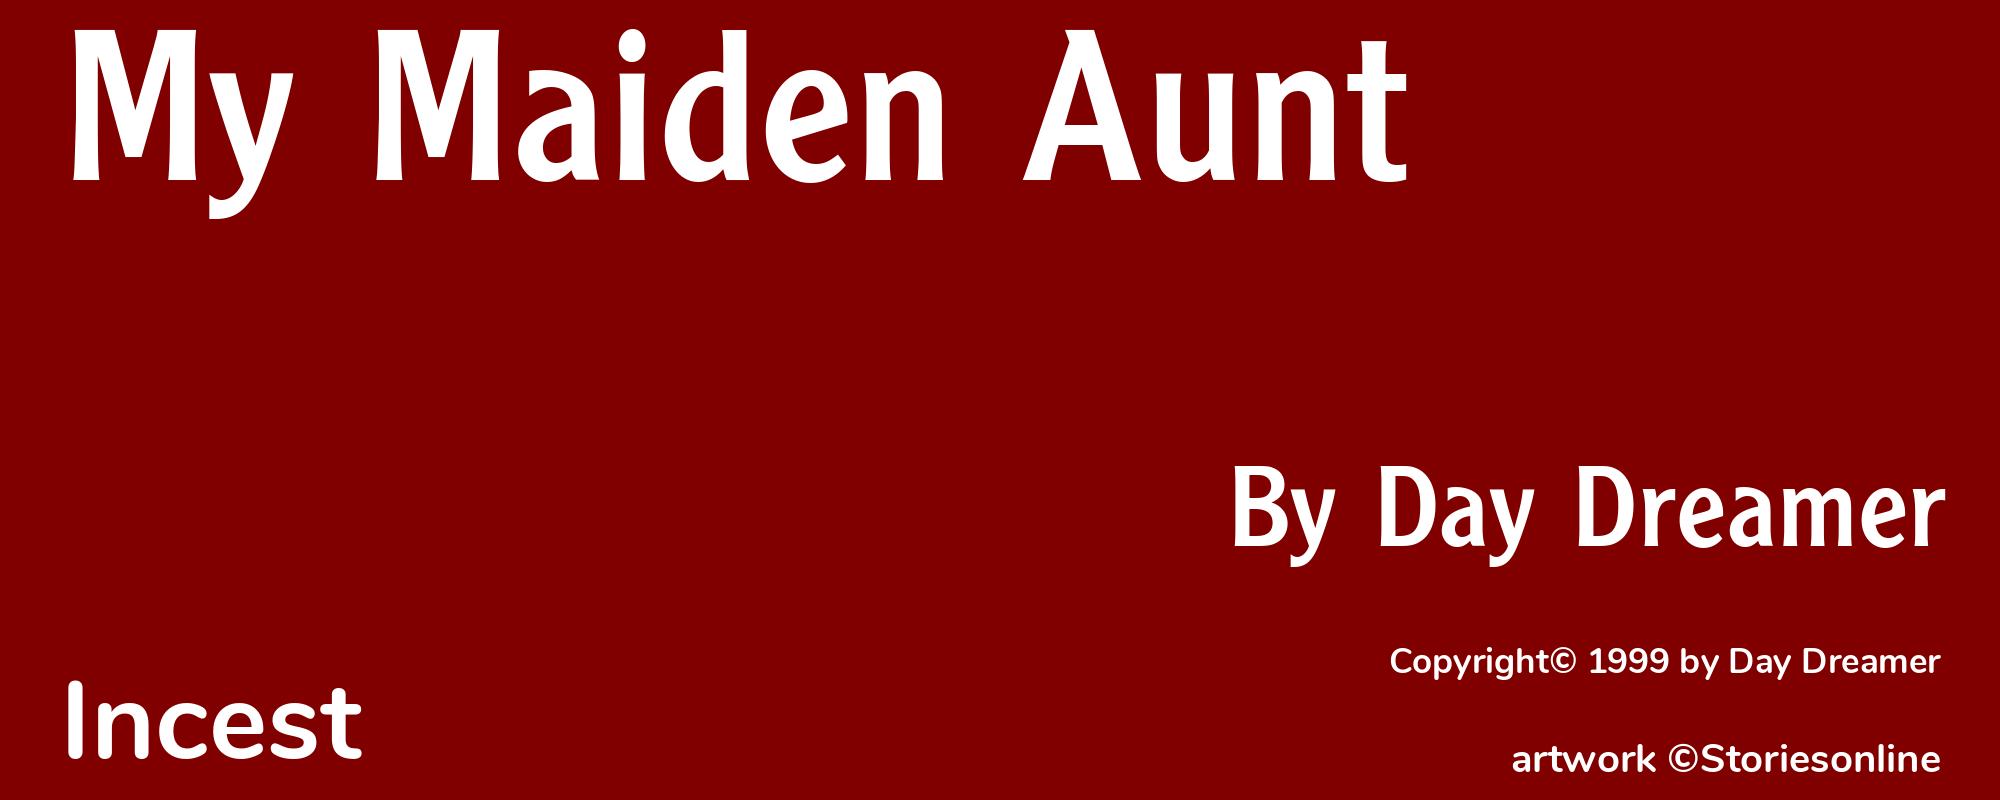 My Maiden Aunt - Cover